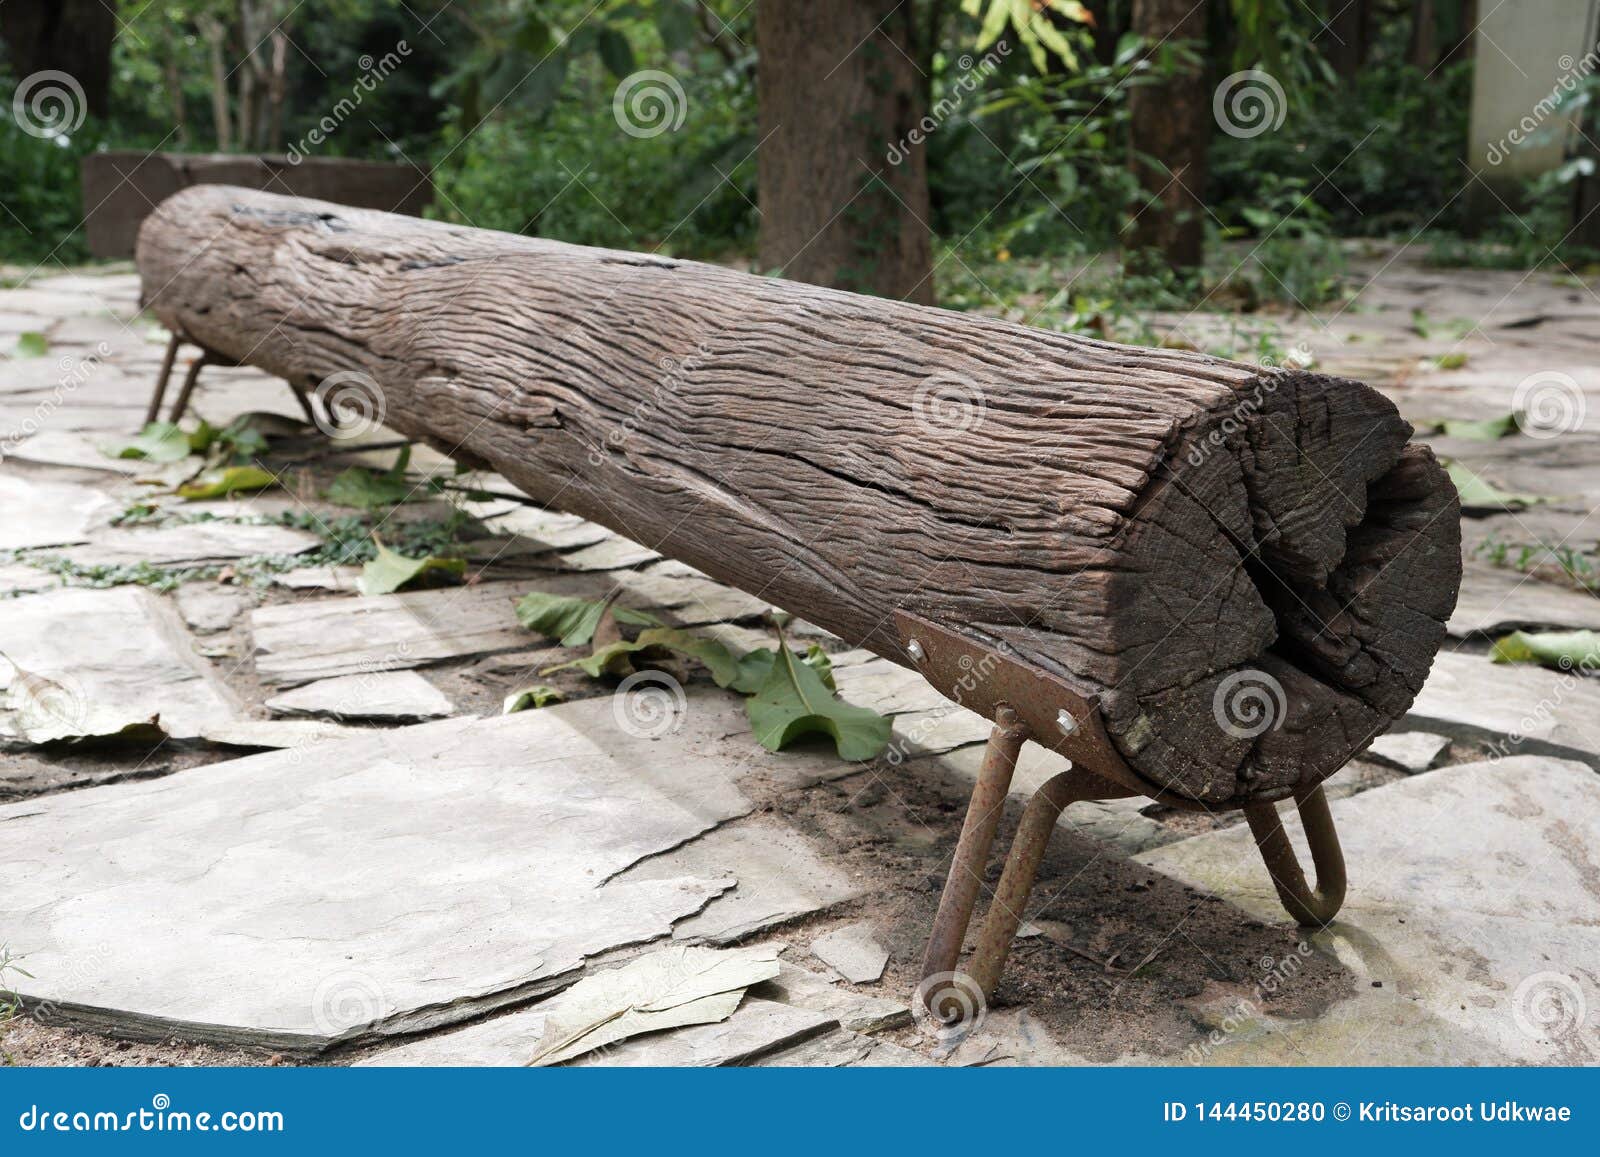 A Long Wood Log Outdoor Bench Stock Photo Image Of Grass